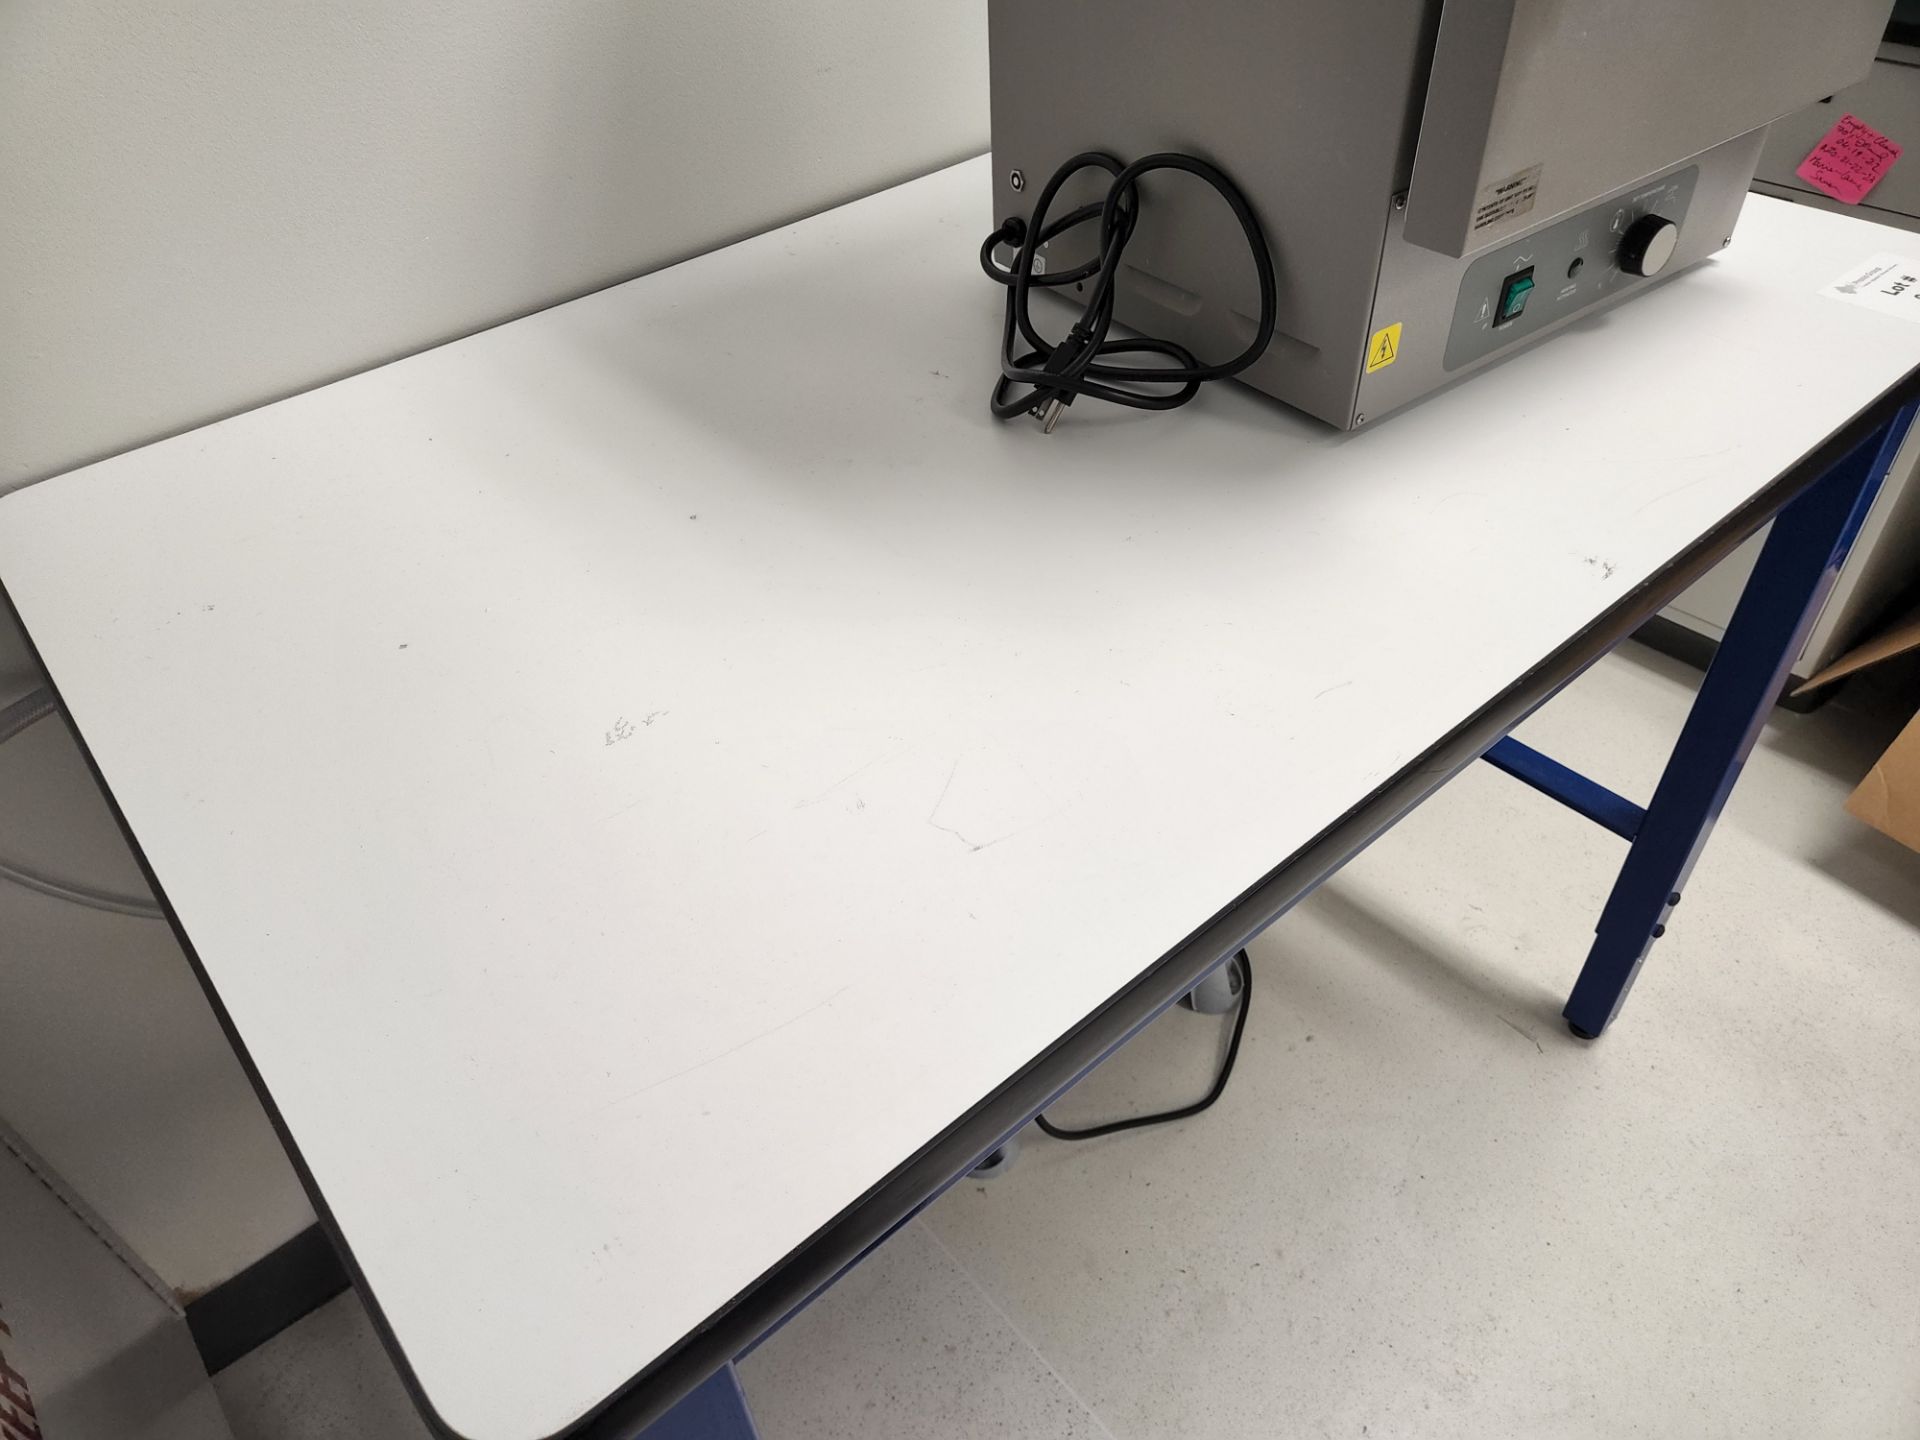 Production Basics 48" X 30" Adjustable Height Workbench With Tote Cart (Asset I.D. # ) - Image 2 of 3